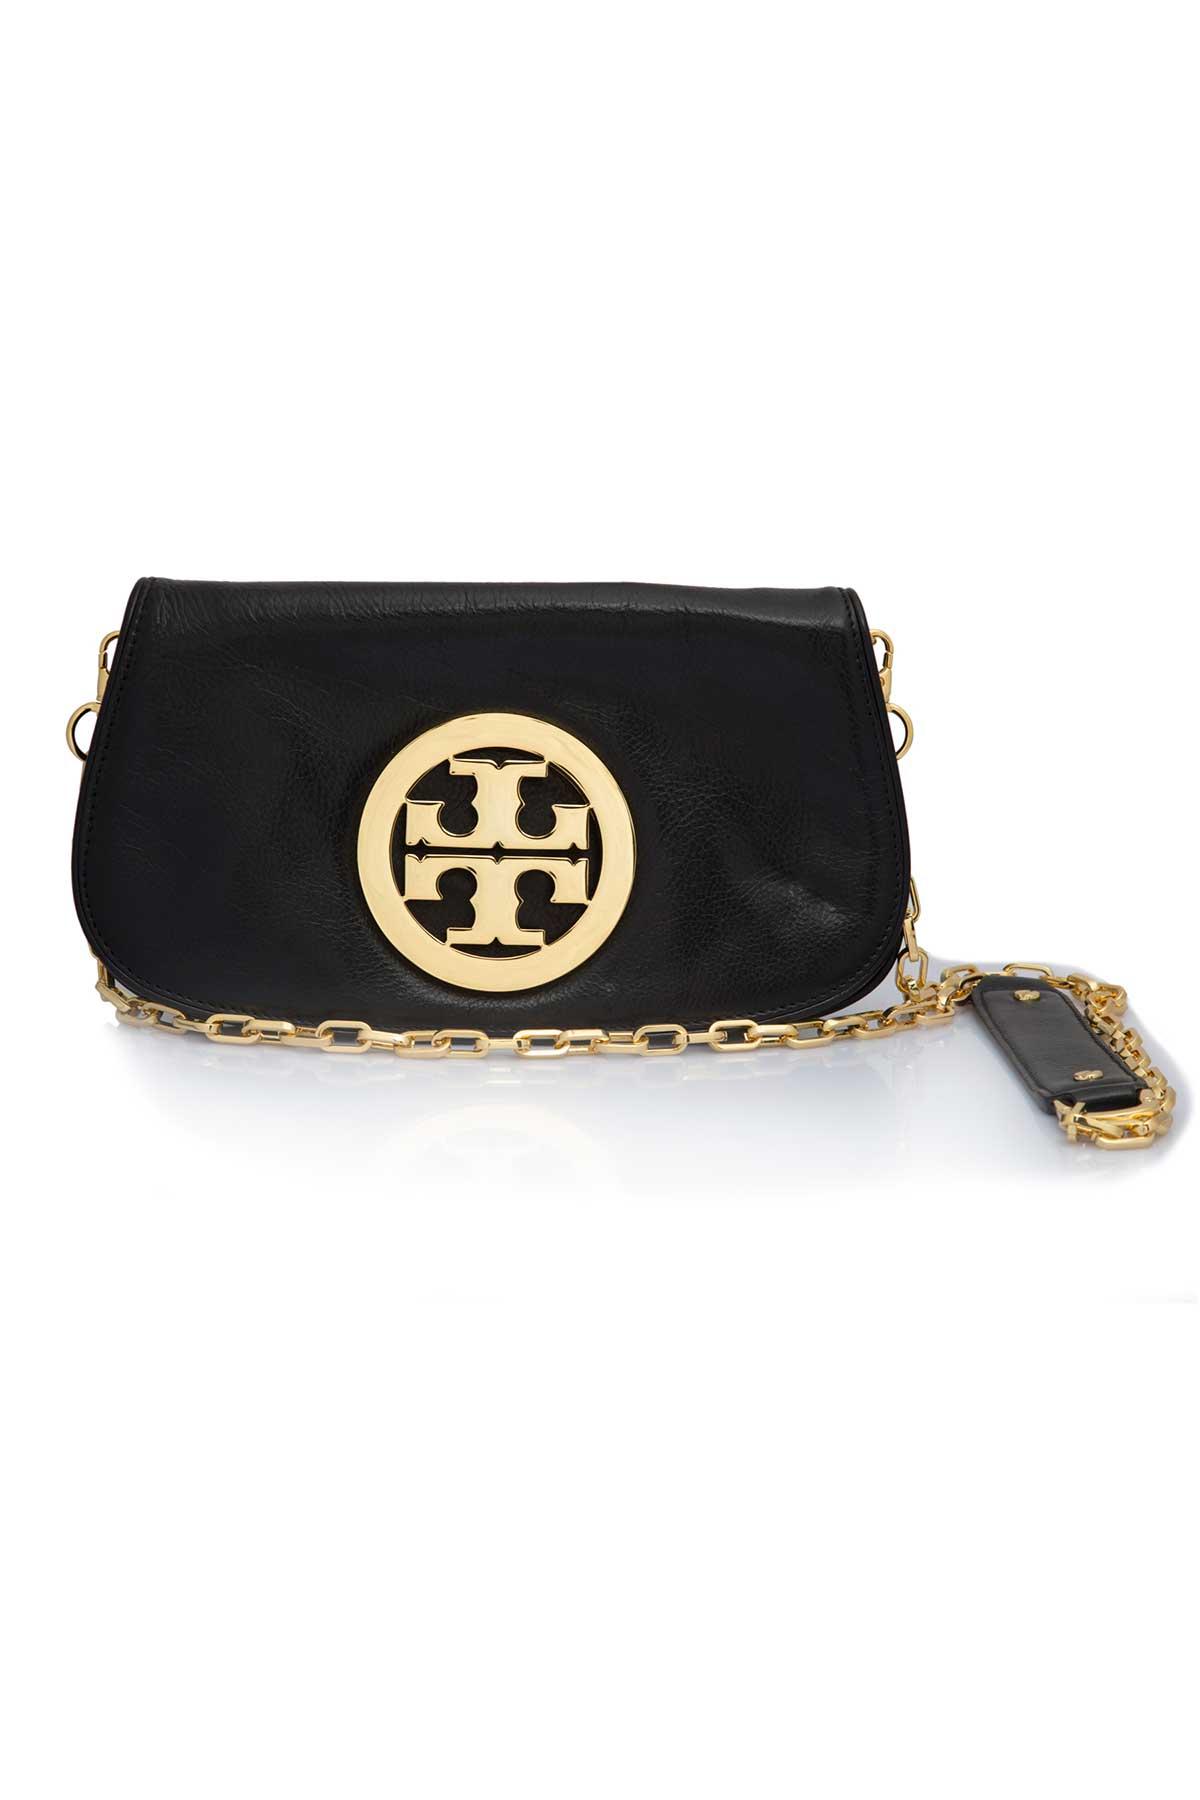 Black Logo Clutch by Tory Burch for rent online | RENT IT BAE